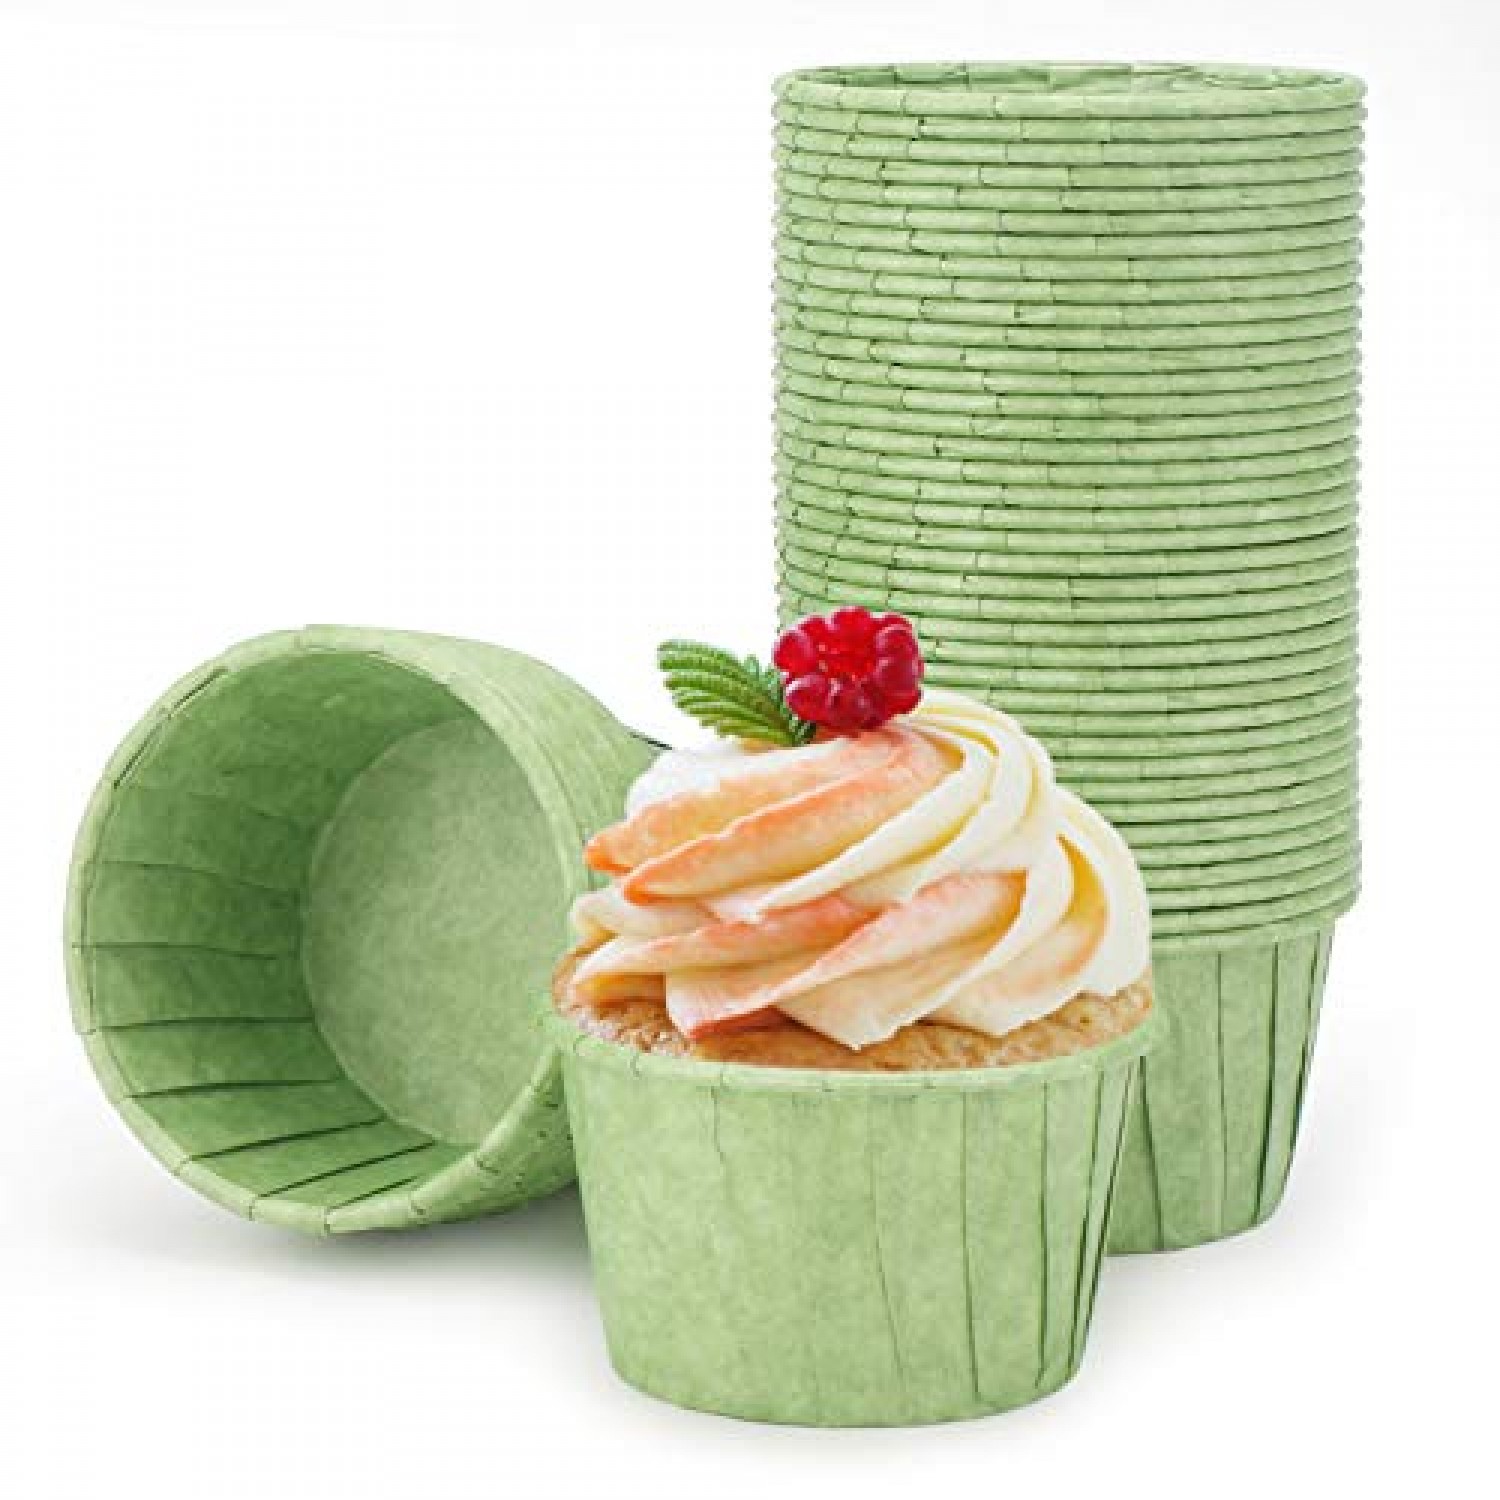 100 Pieces Cupcake Liners cases Set - Multi Color cup cake case liner paper